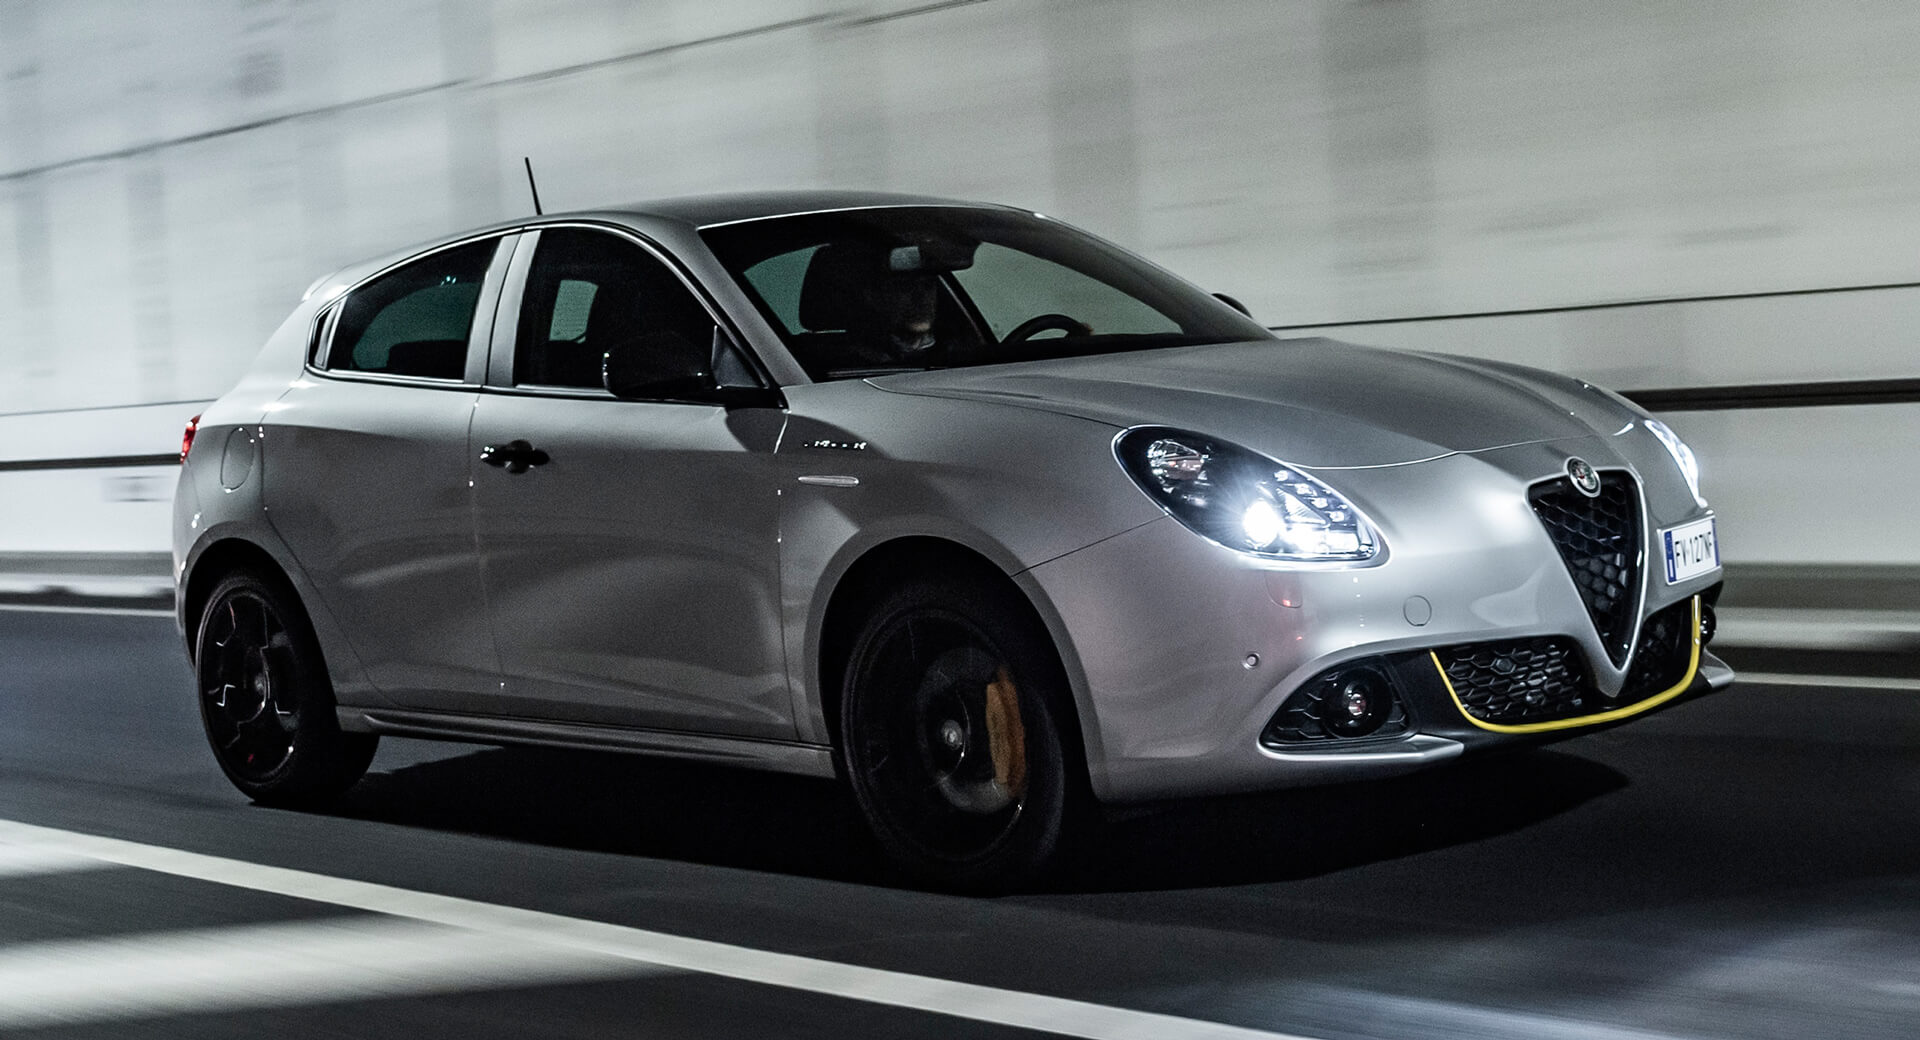 Alfa Romeo Giulietta To Bite The Dust By Year's End, Replaced By